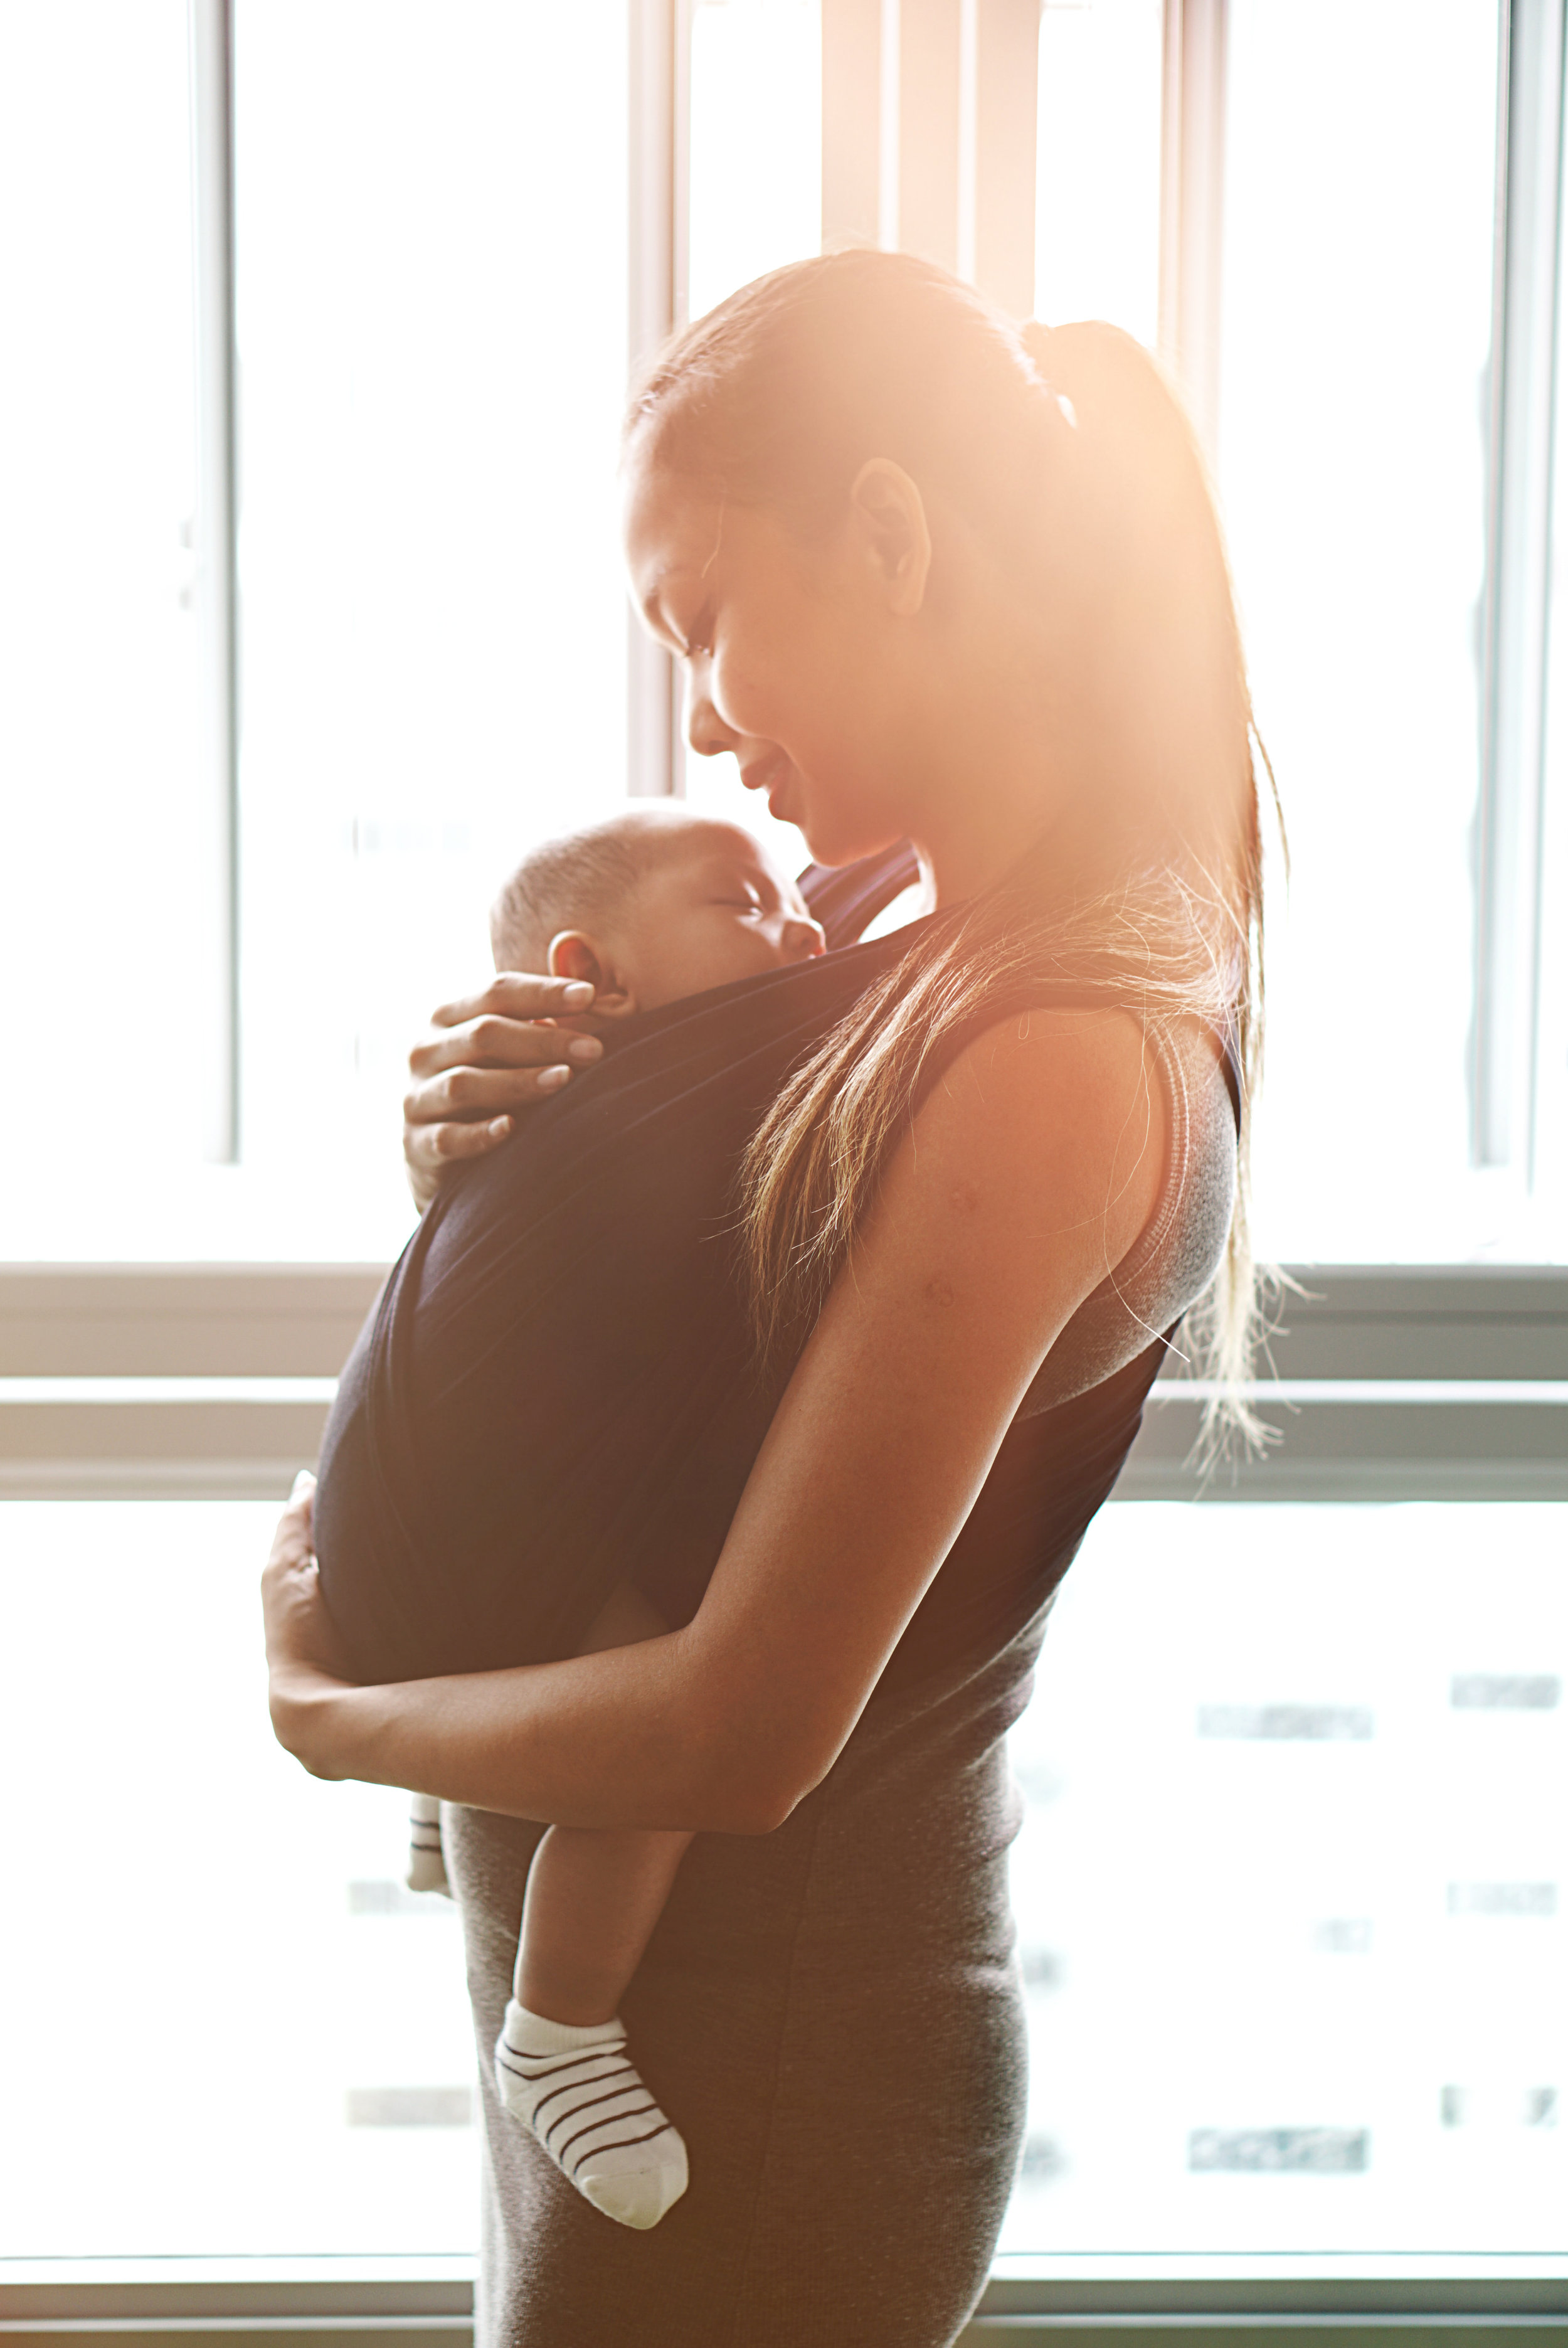 10 Things to Aid Postpartum Recovery